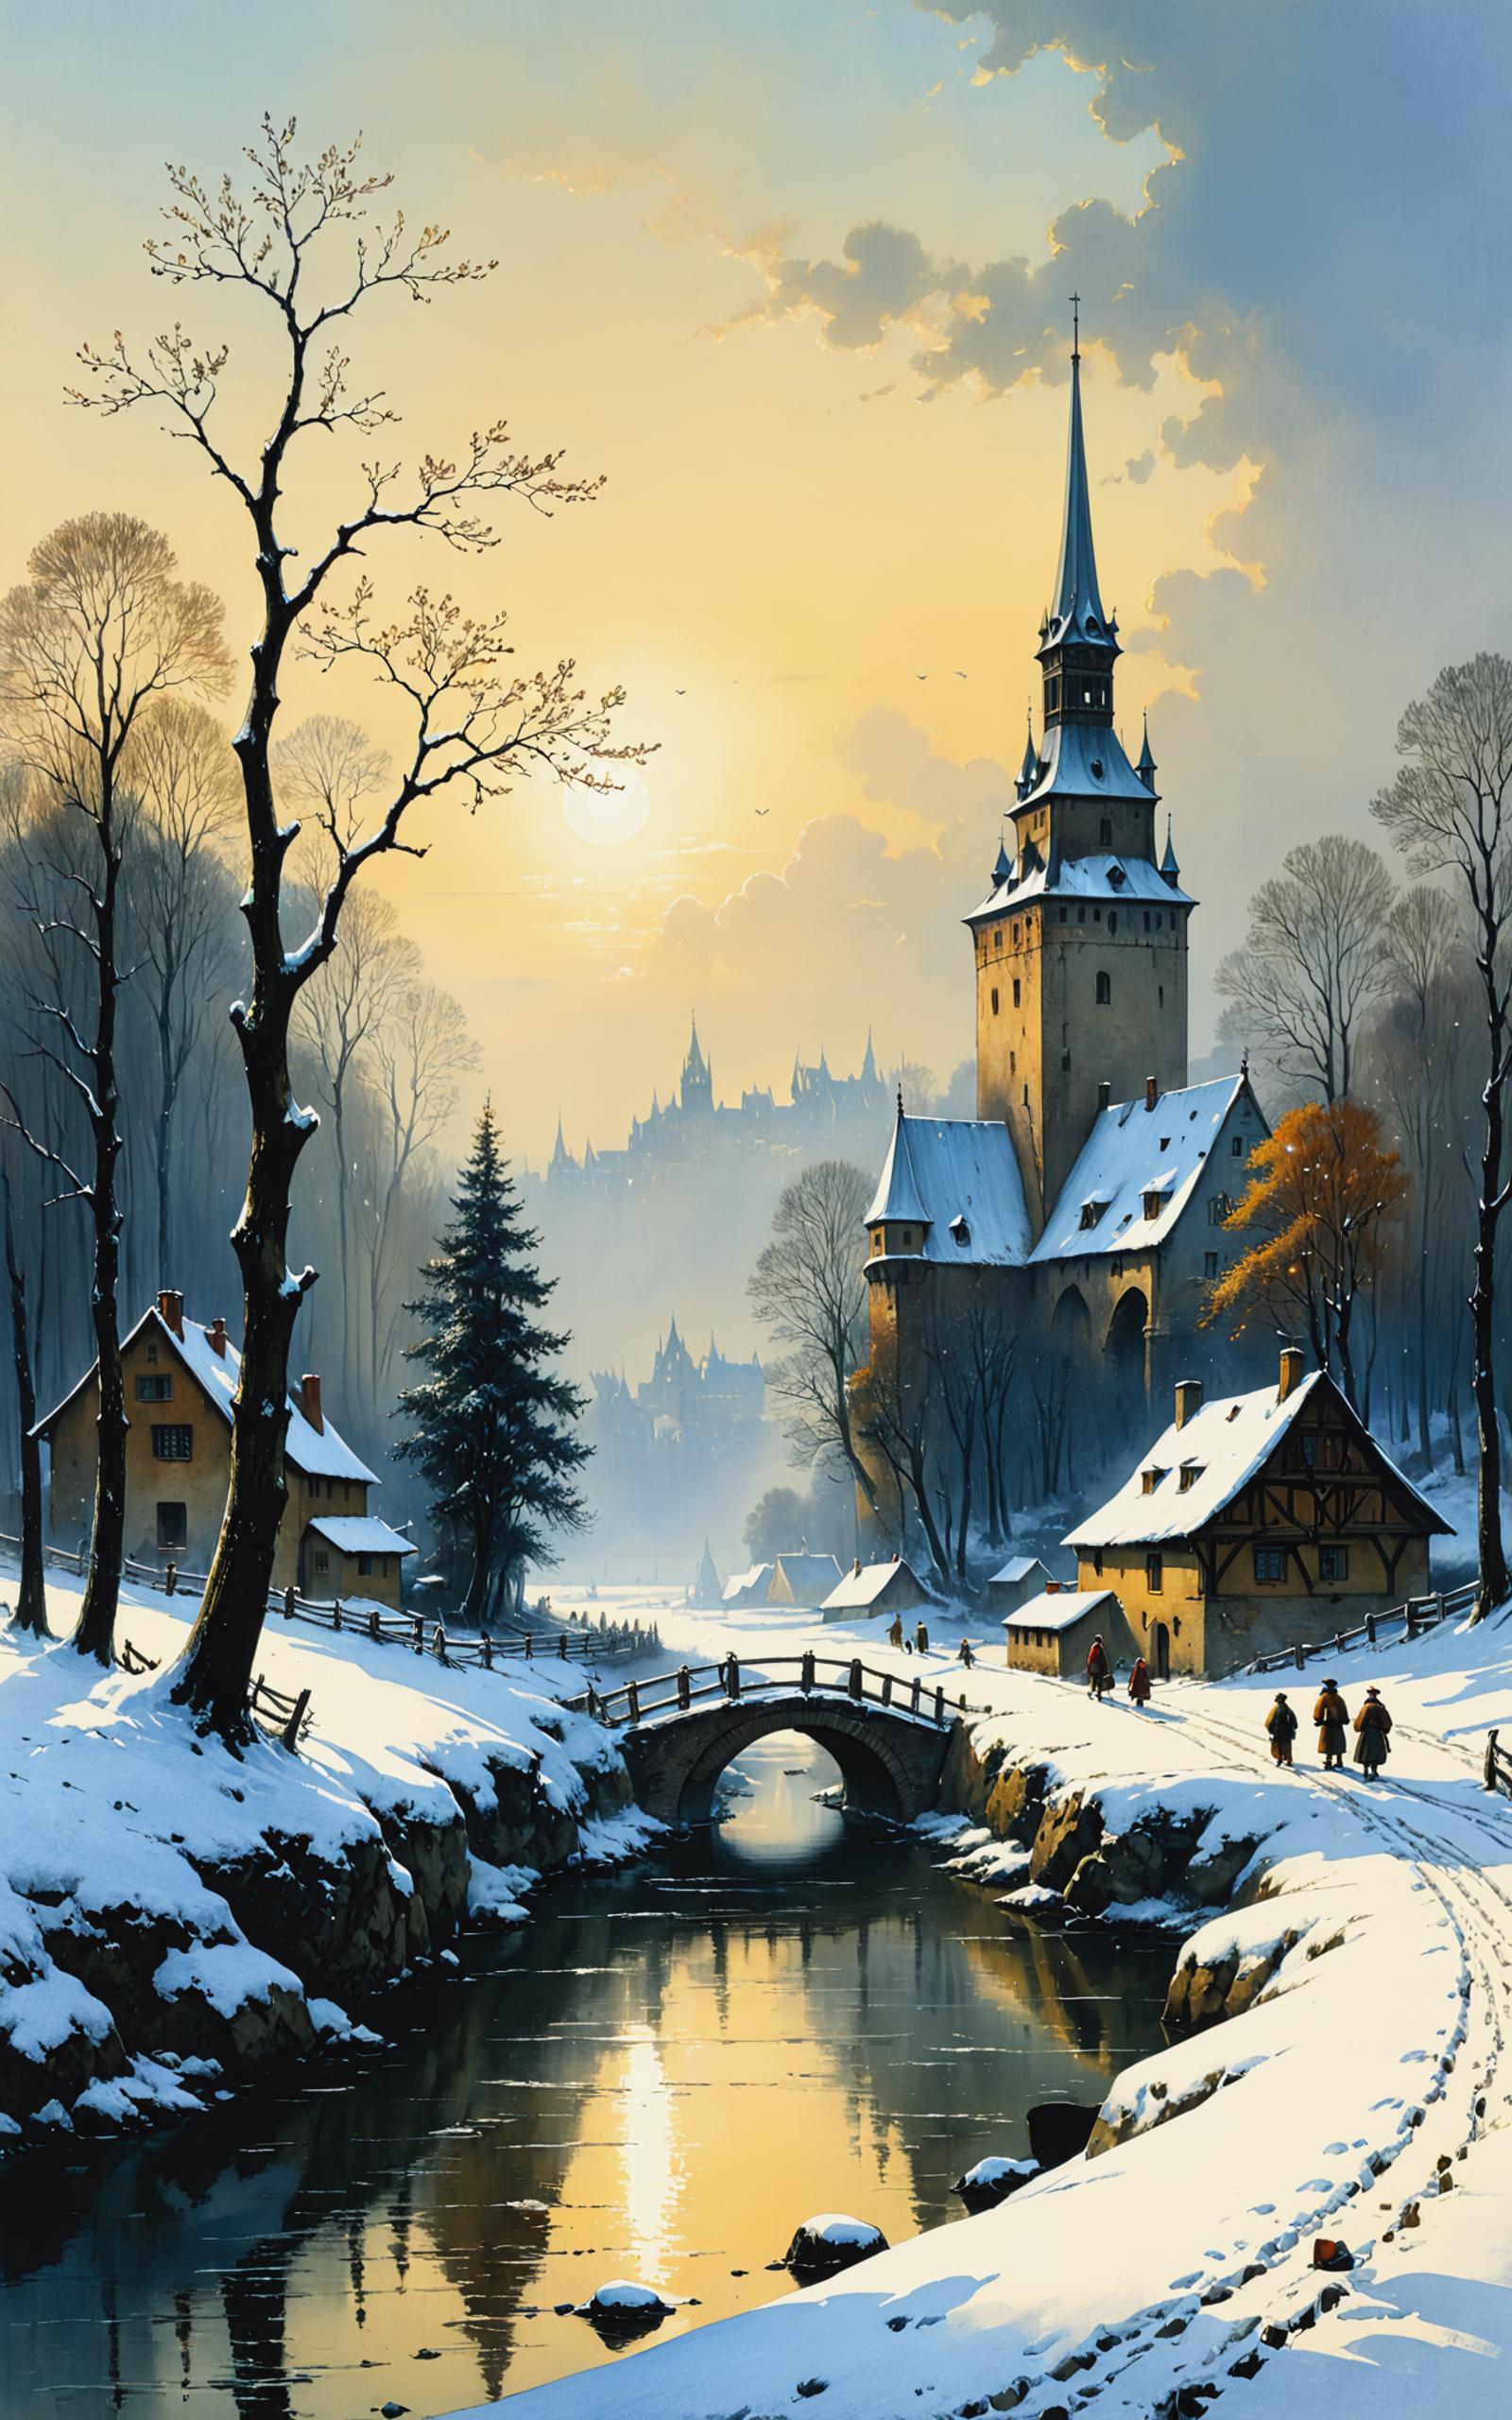 A painting of a winter scene with a bridge over a river, a castle, and a town